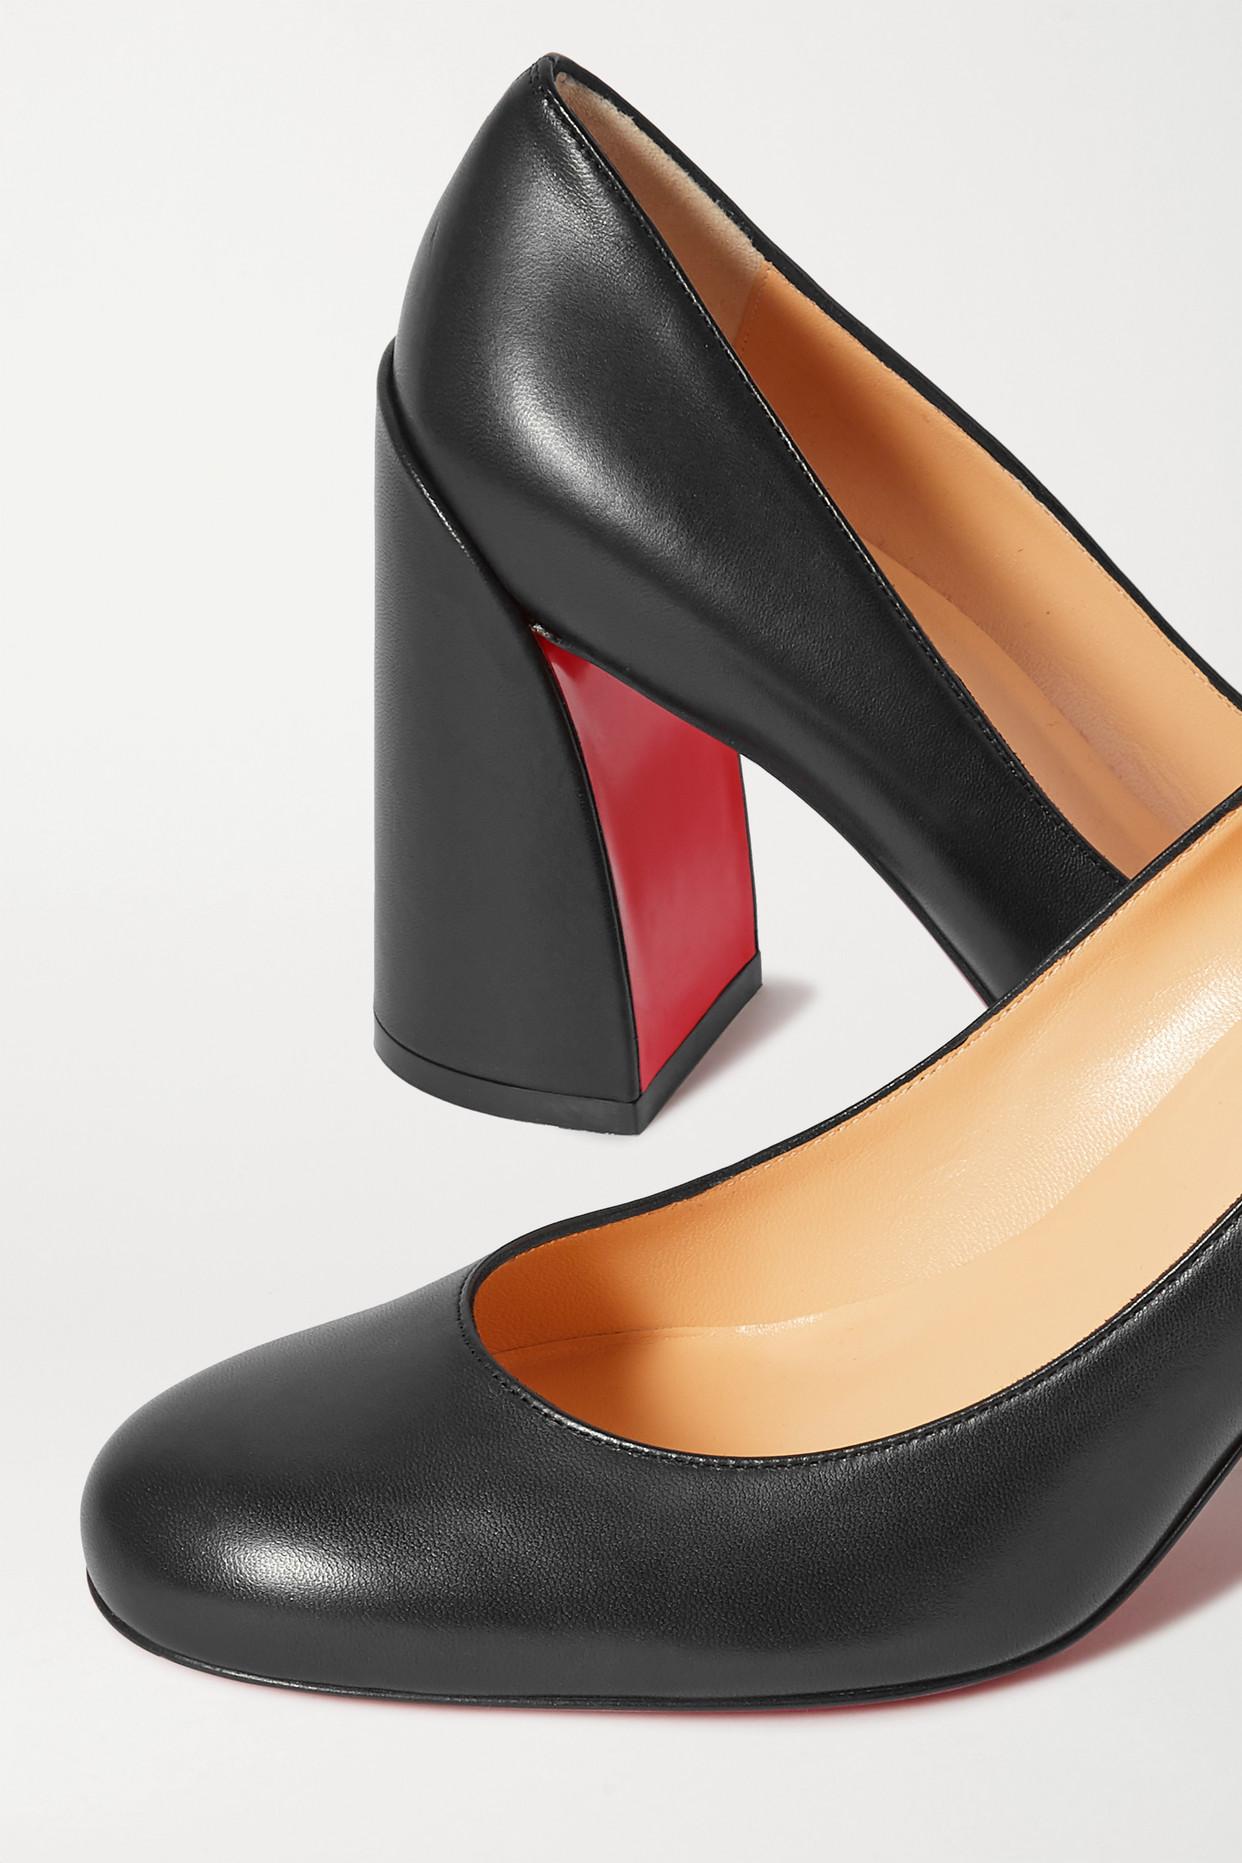 Christian Louboutin Miss Sab 85 Leather Pumps in Black | Lyst